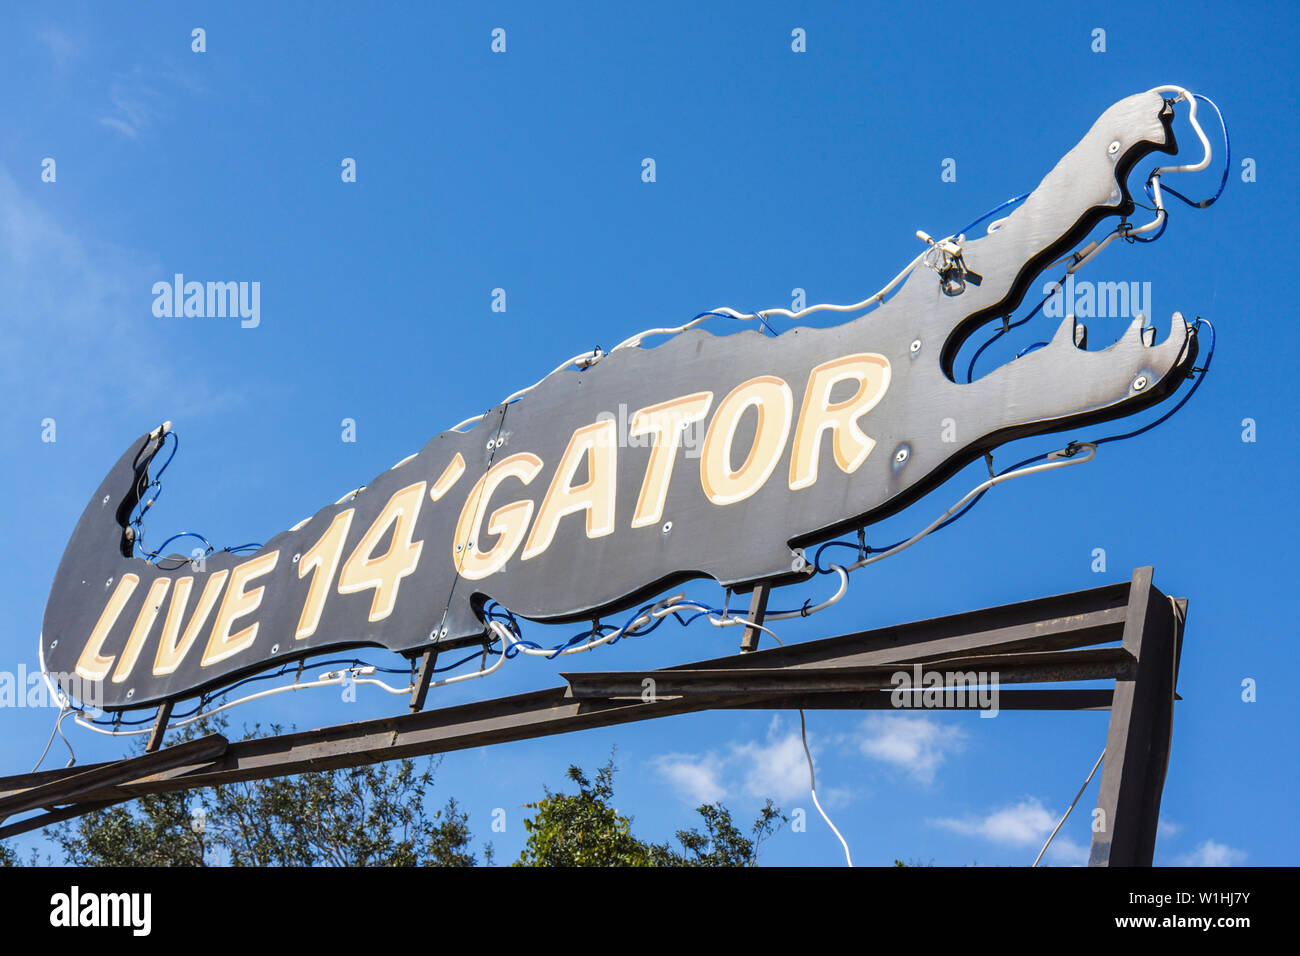 Florida Highlands County,Sebring,US highway Route 27,Watering Hole,bar lounge pub,drink drinks drinking spot,roadside neon sign,live alligator,Bully,a Stock Photo